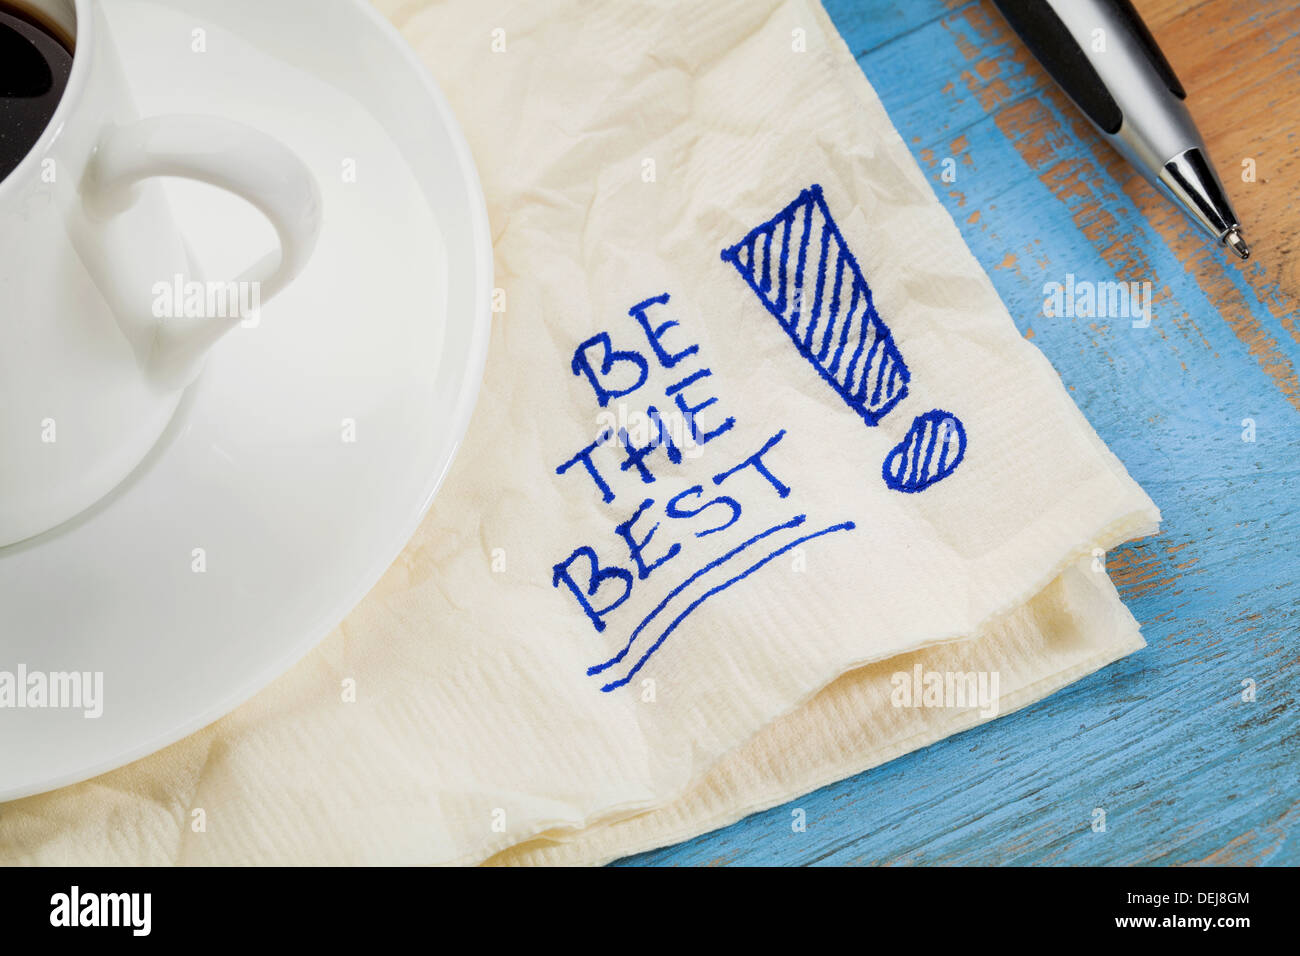 be the best - motivational slogan on a napkin with cup of coffee Stock Photo